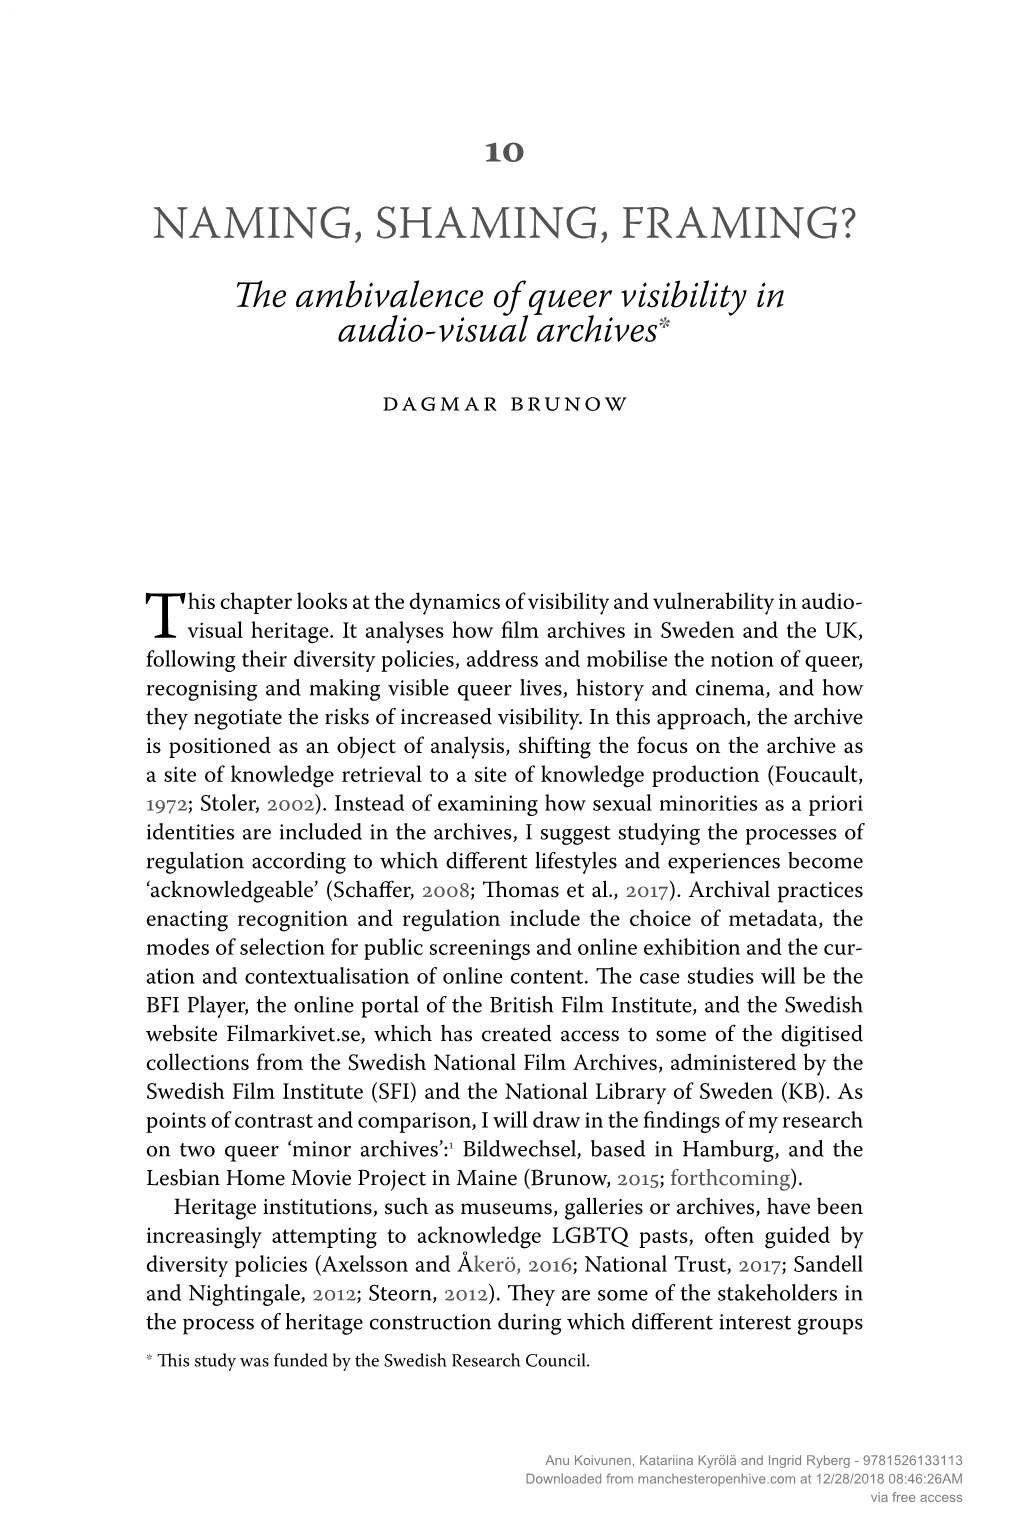 The Power of Vulnerability: Mobilising Affect in Feminist